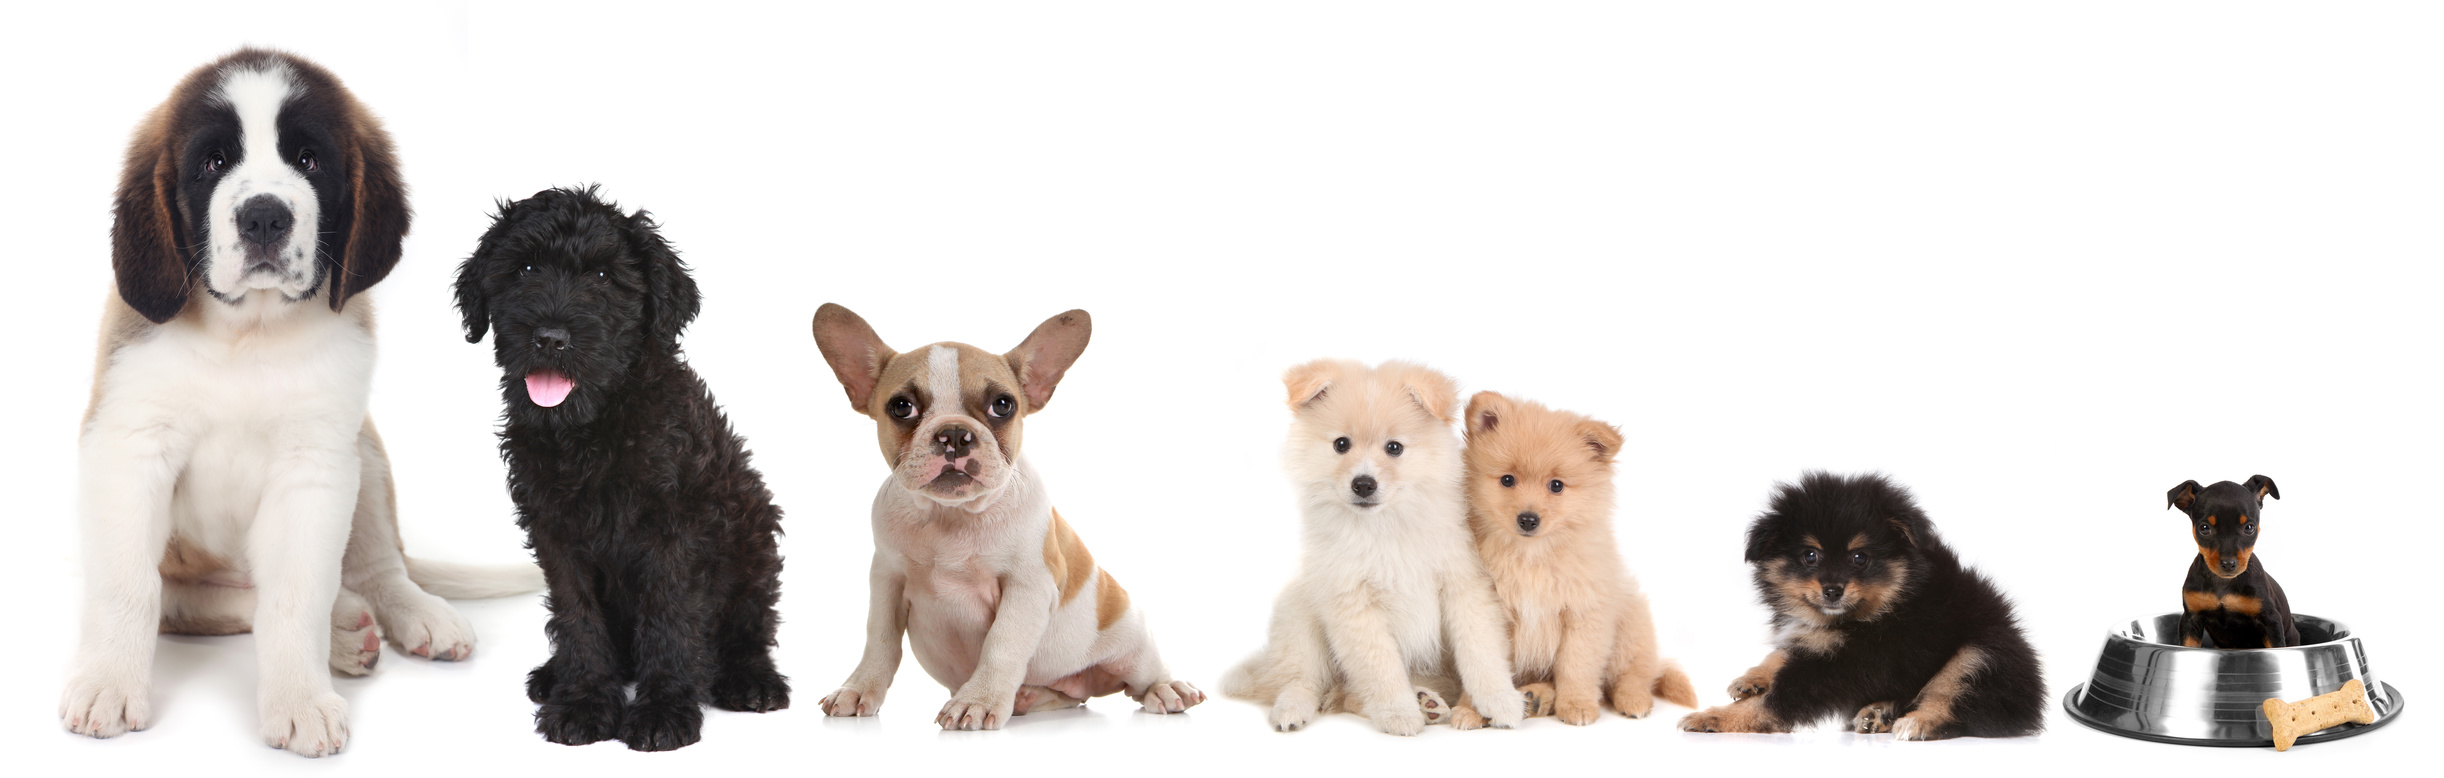 Different Breeds of Puppy Dogs on White